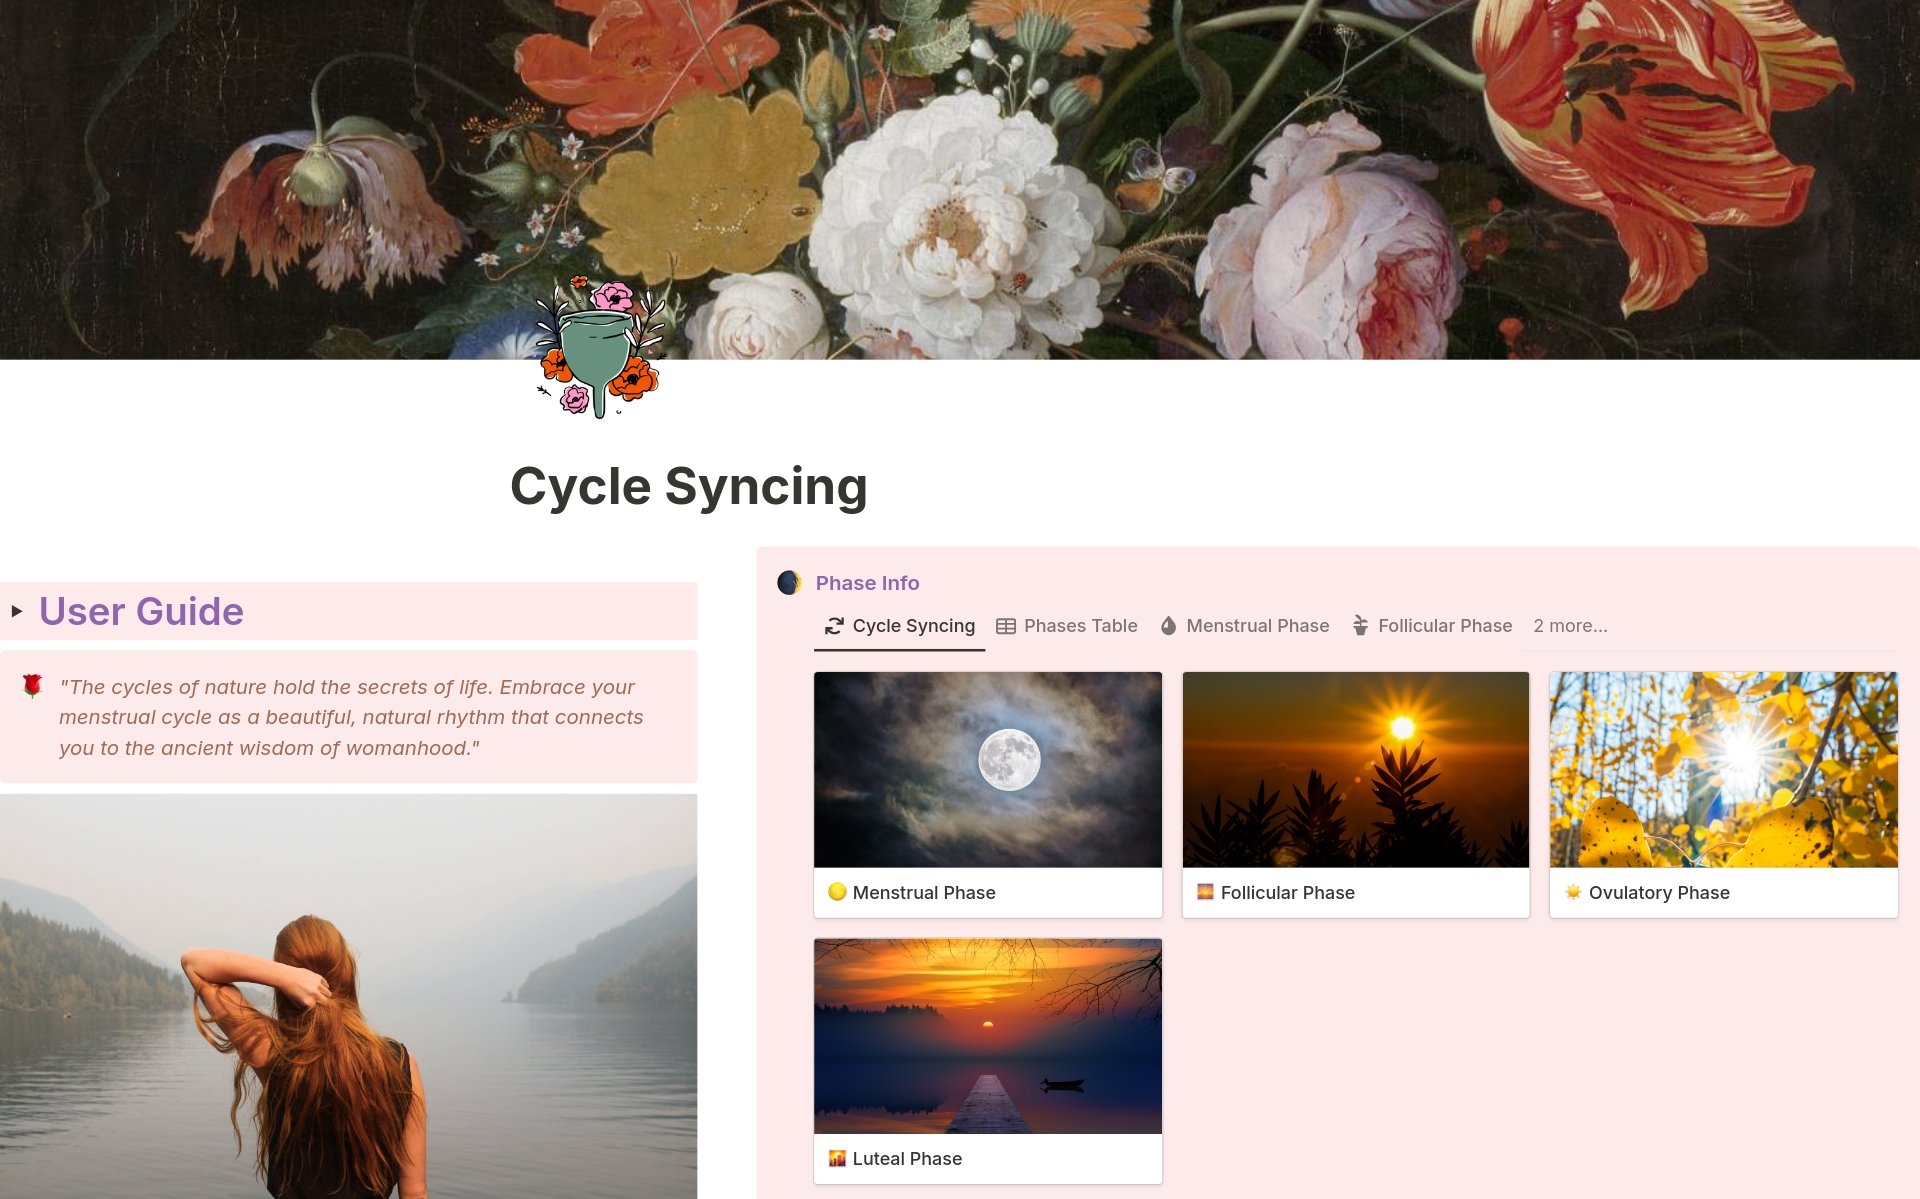 If you're new to cycle syncing or just looking to deepen your practice, this template will provide an easy and aesthetically pleasing way to tune in to the ebb and flow of your own rhythms.